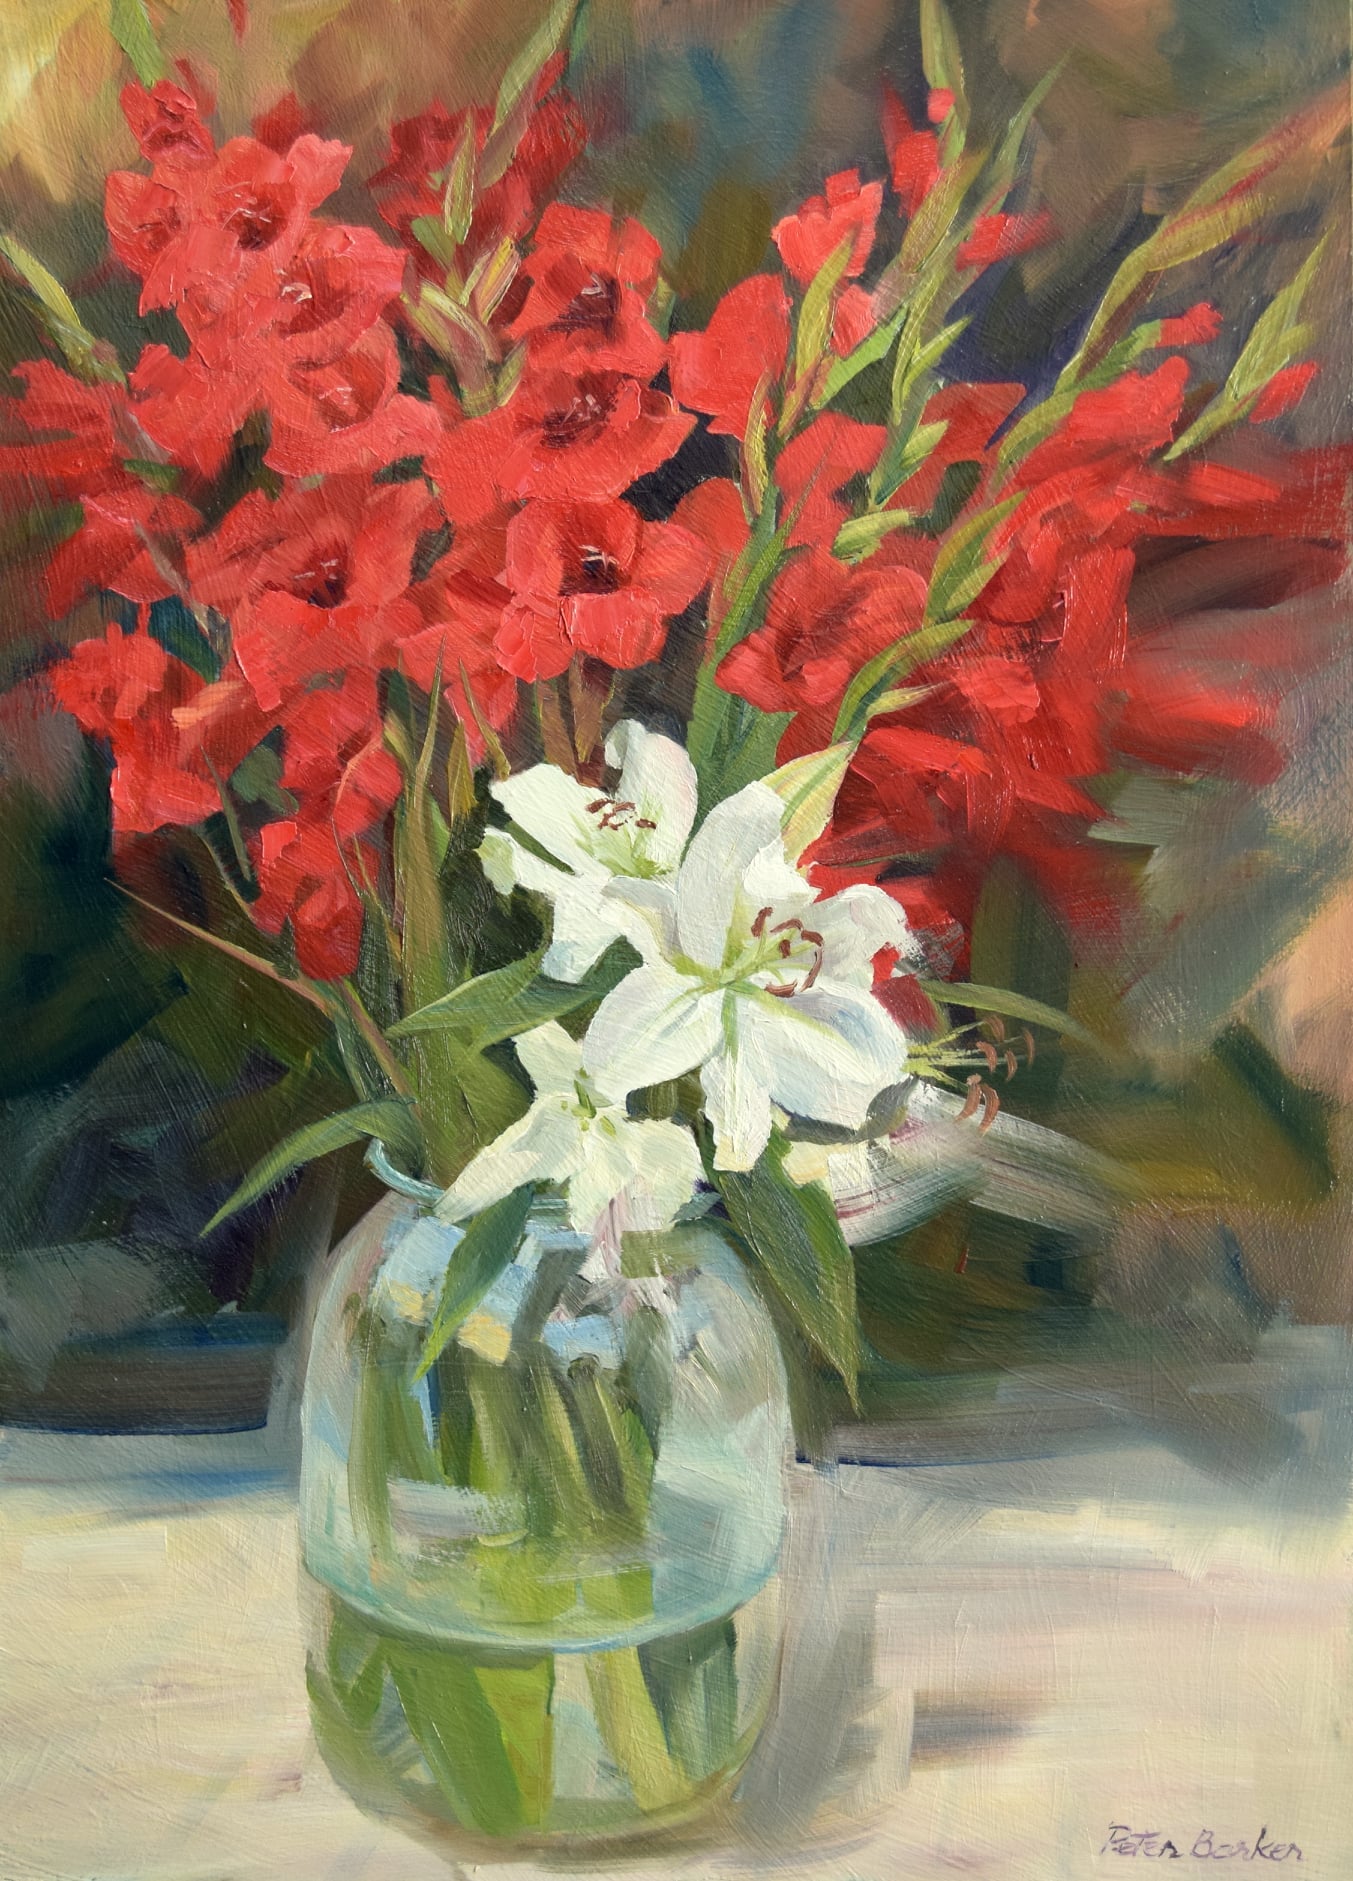 17 x 12 inch oil of a bunch of Crimson Gladiolies and white Lilies in a glass jar, painted outside on a balmy Summer day.